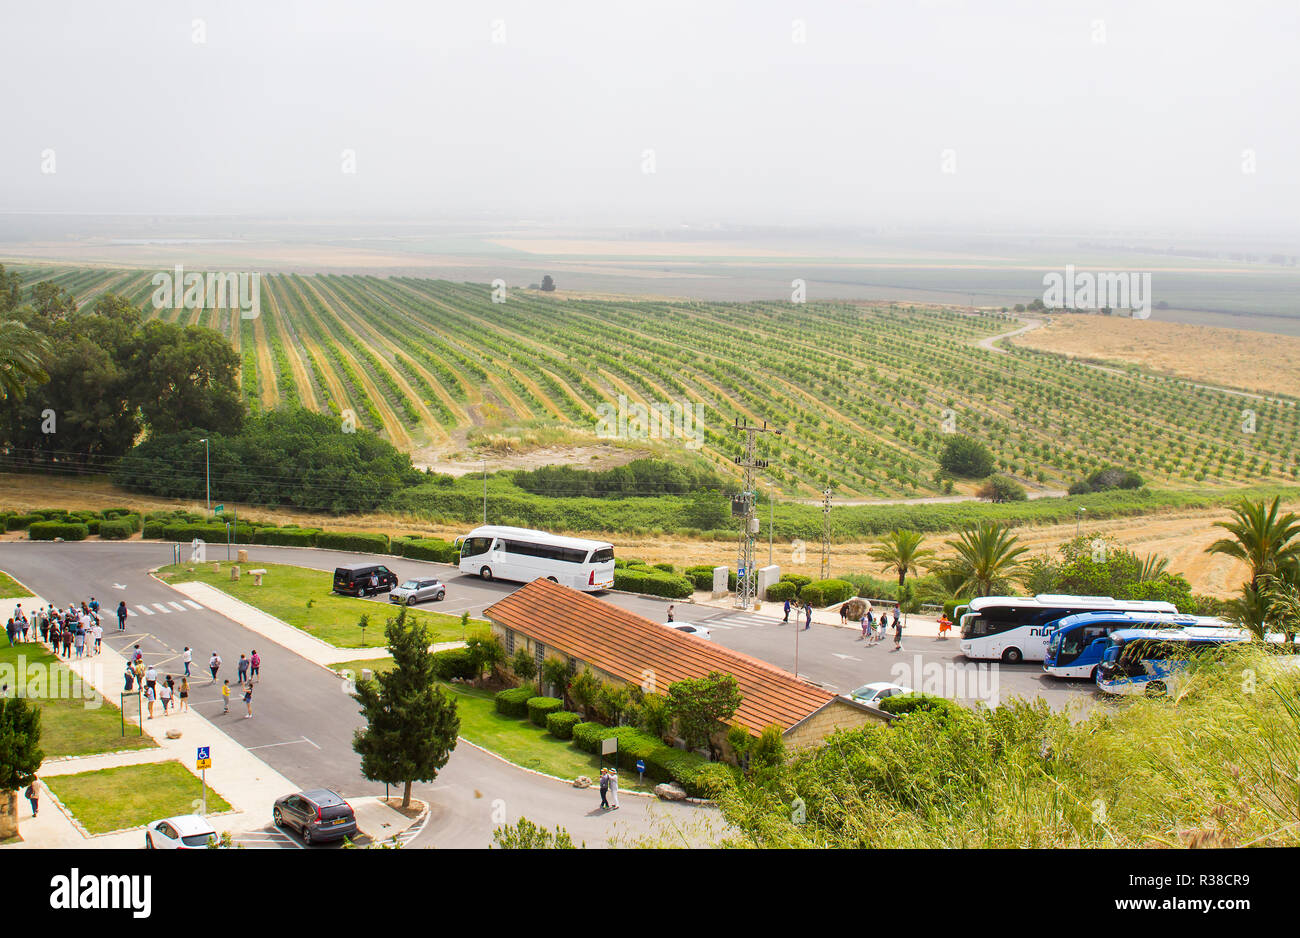 The fertile Valley of Jezreel taken from the historic Tel Megiddo in Lower Galilee Israel. Te car park for visitors to the Tel Megiddo is in the  fore Stock Photo